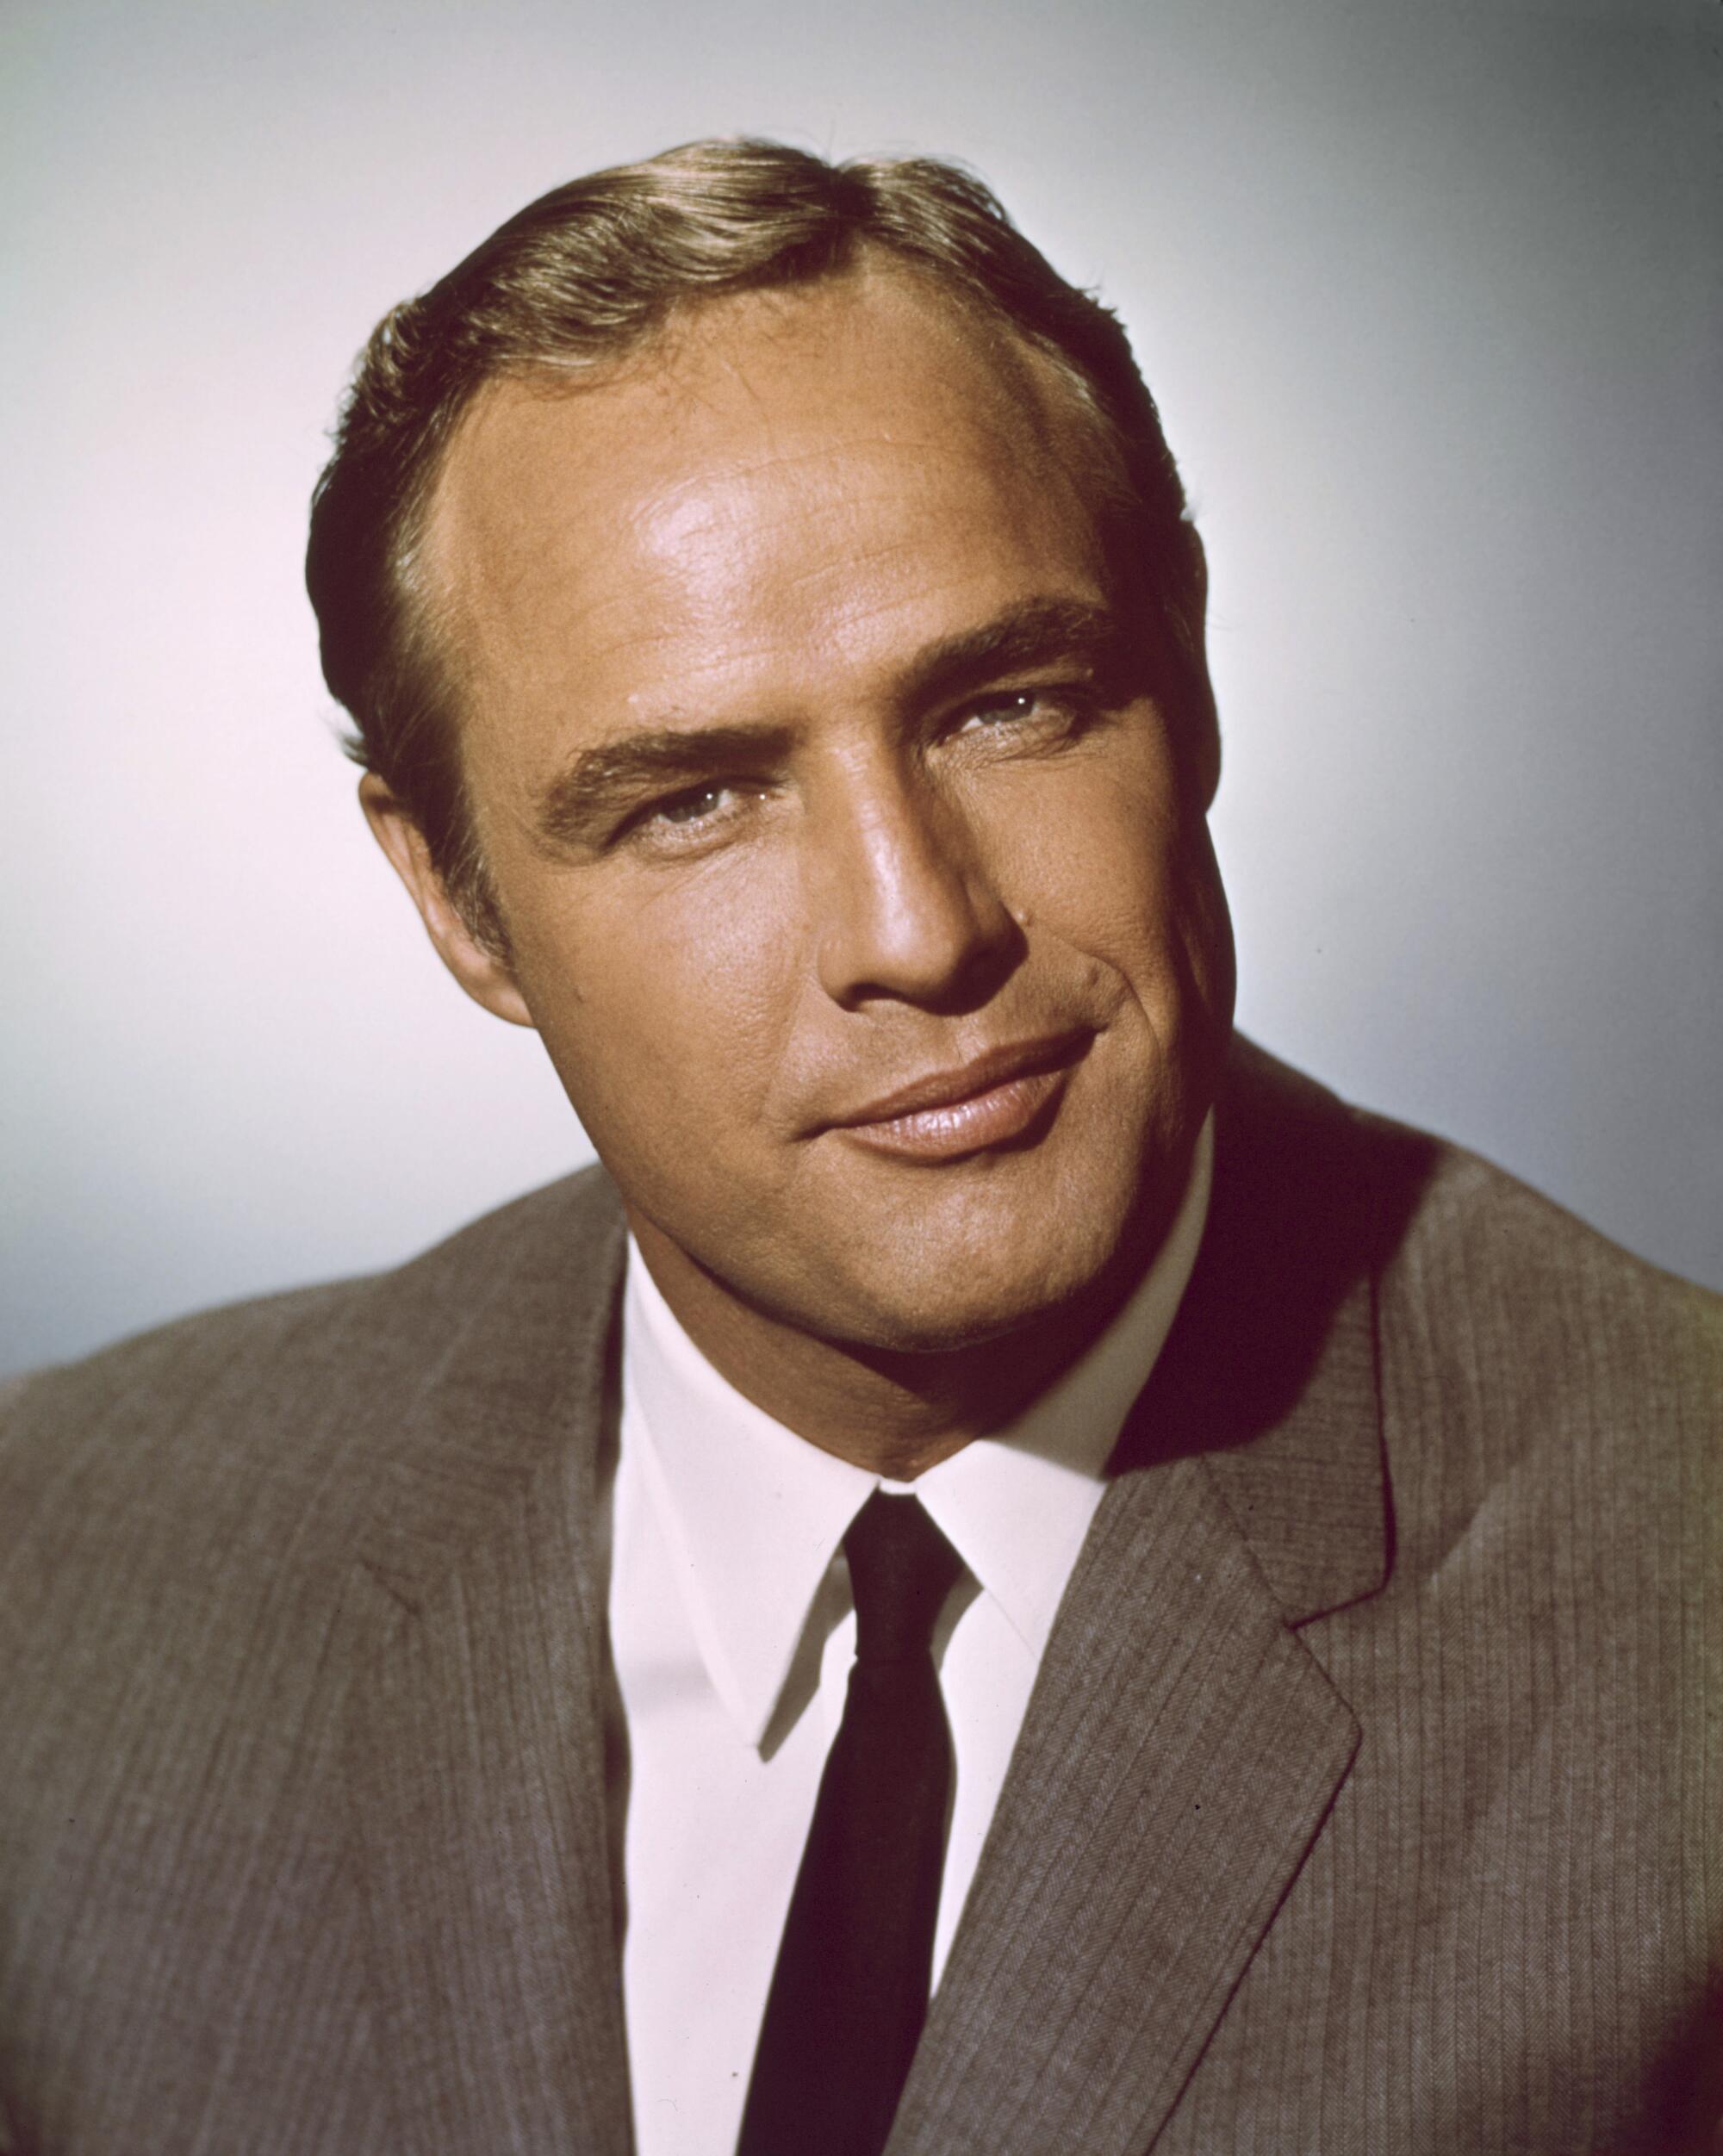 Actor Marlon Brando, in a brown suit jacket and tie, with a slight smile